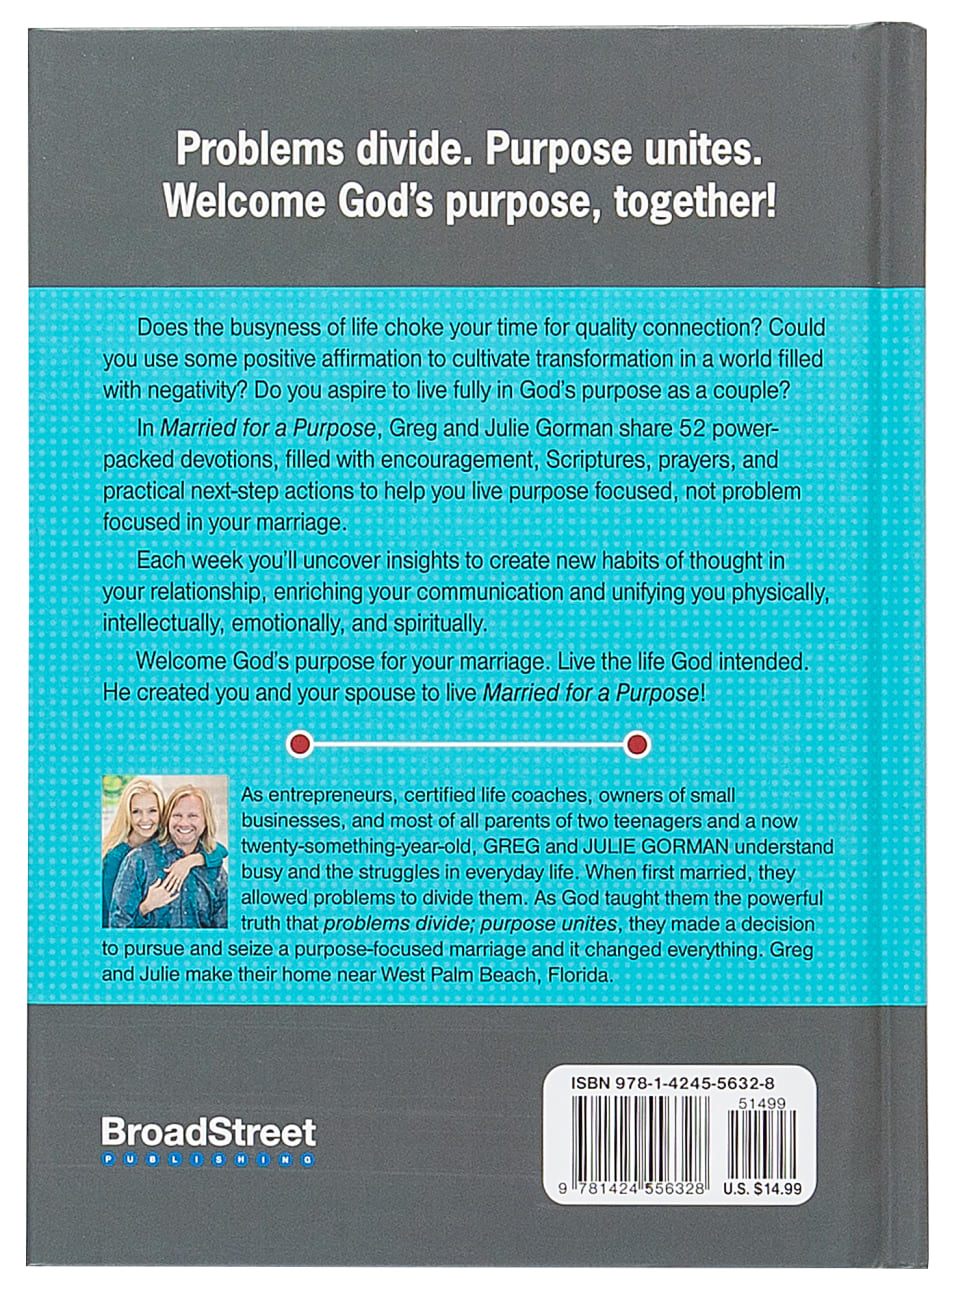 Married For a Purpose: New Habits of Thinking For a Higher Way of Living - 52 Weekly Devotions For Couples Hardback